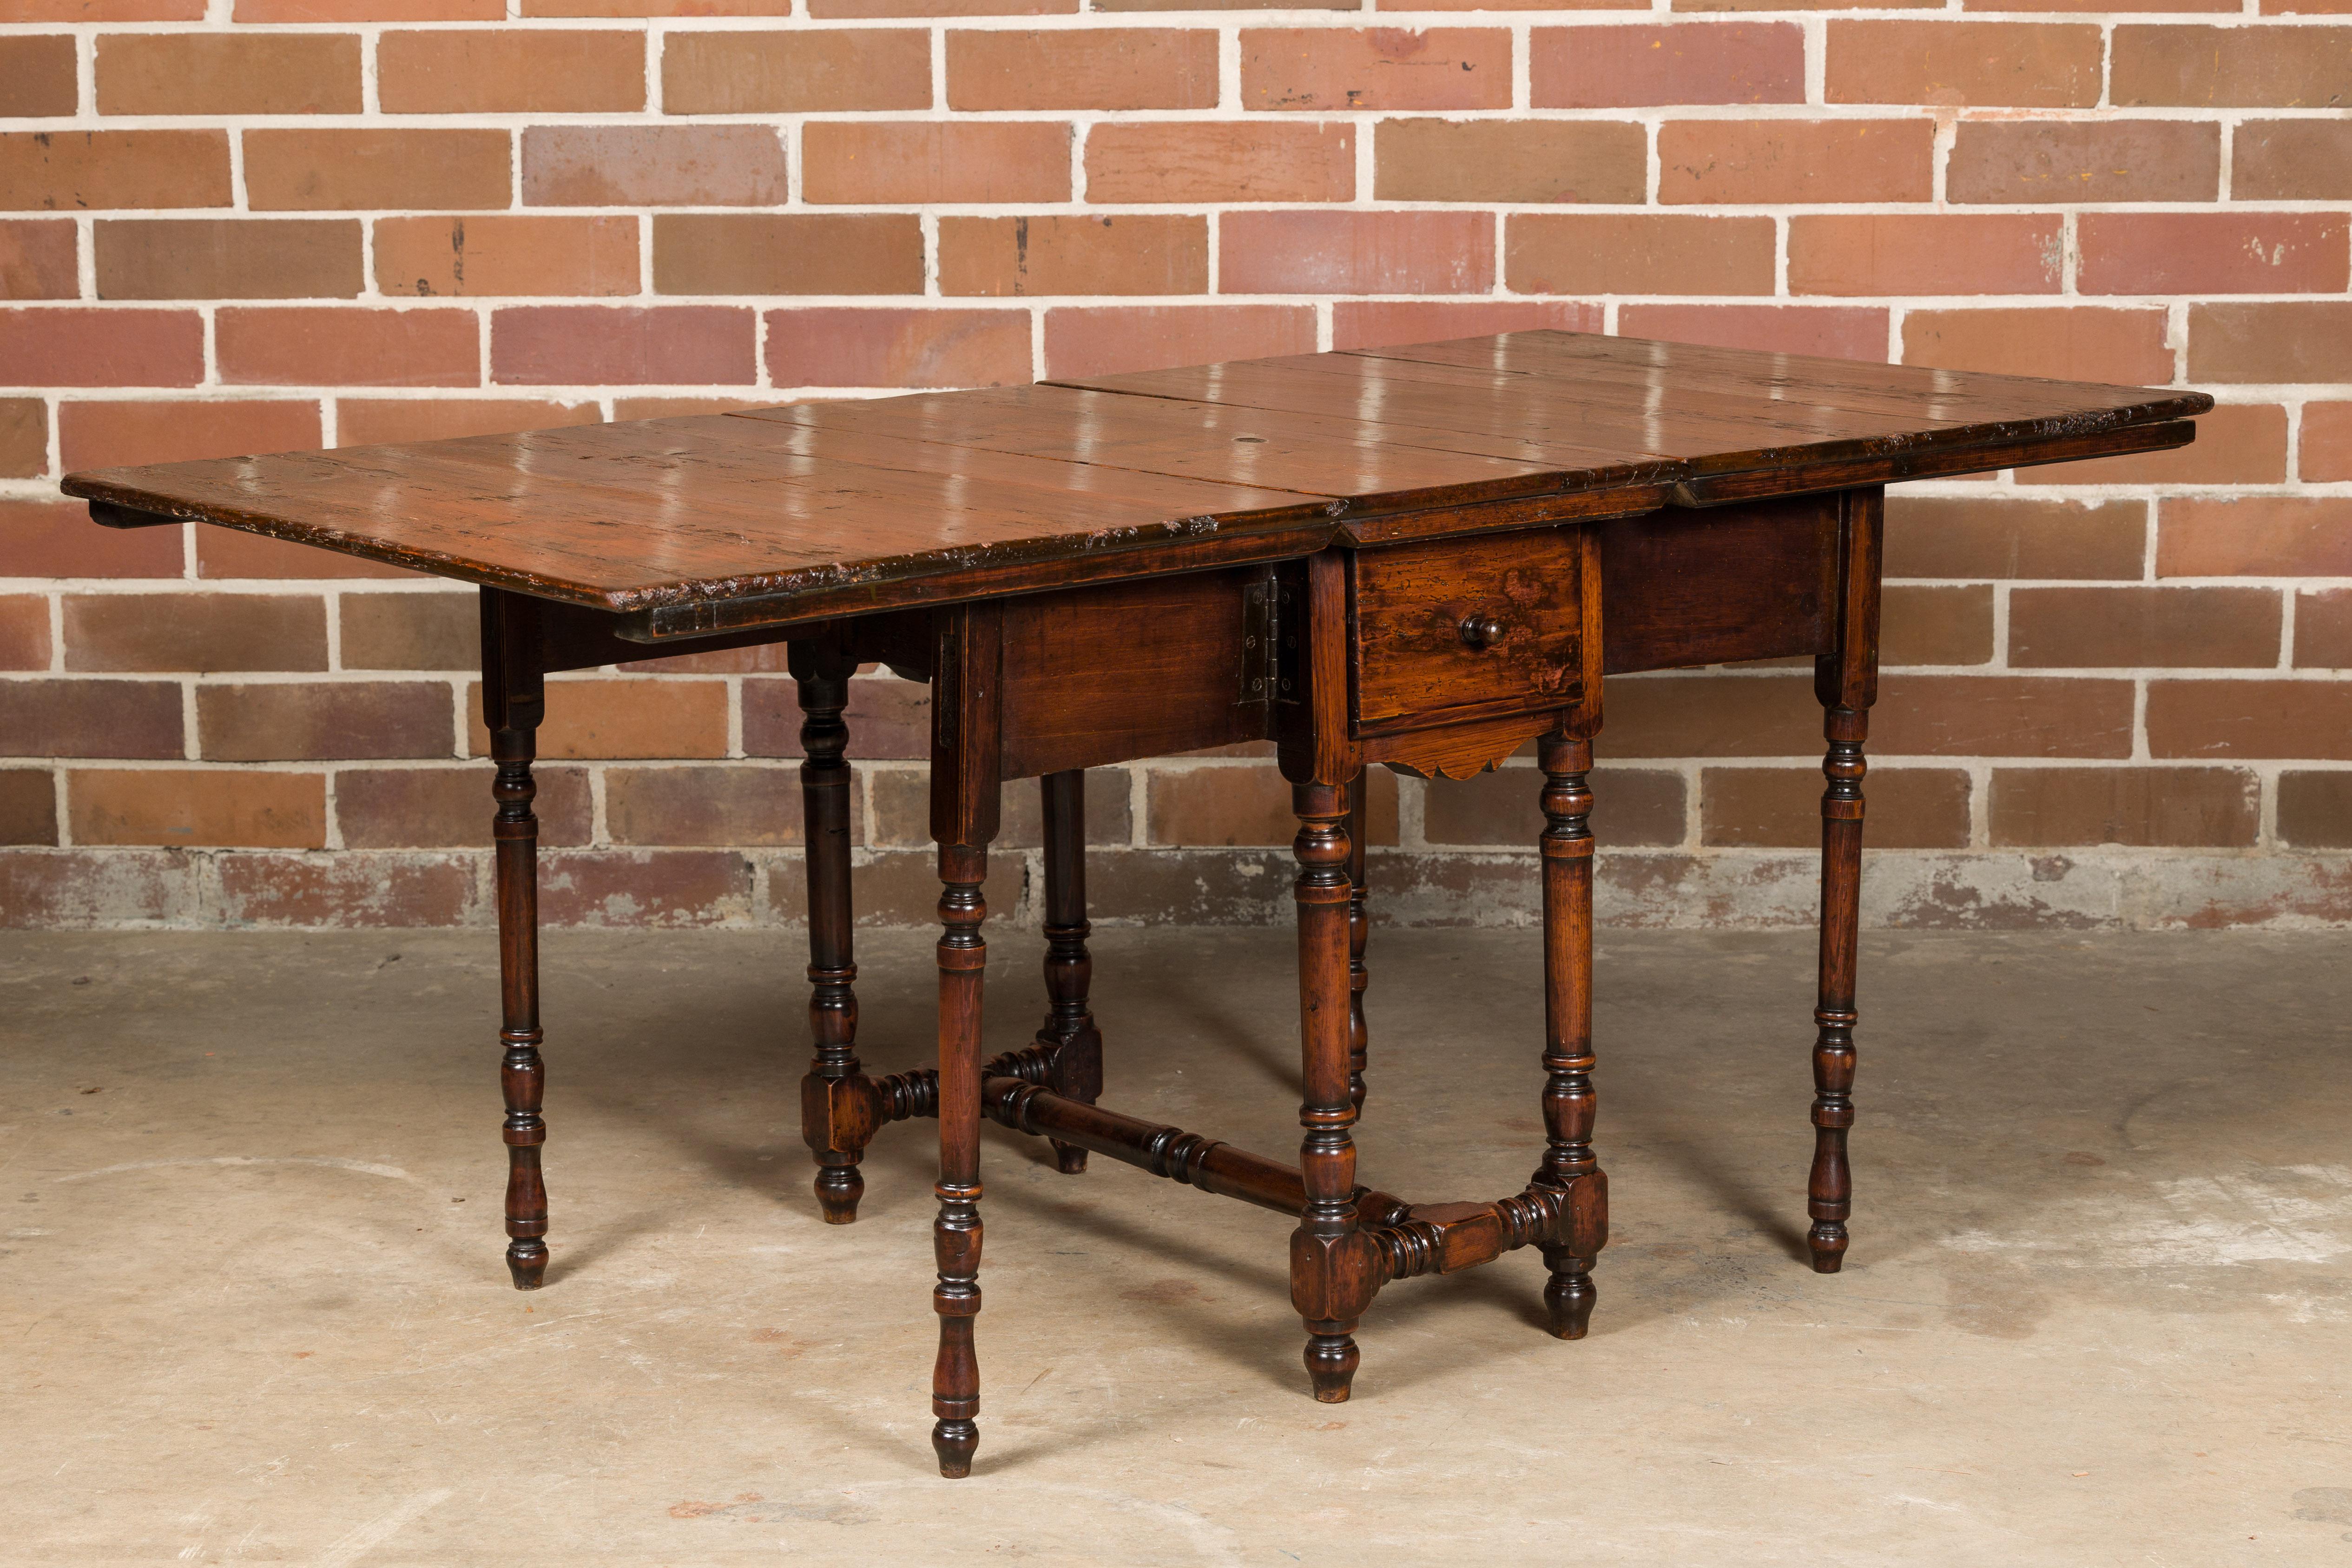 An English oak drop leaf table from the 19th century with slender turned legs, two lateral drawers and H-Form cross stretcher. This English oak drop-leaf table from the 19th century is a splendid example of functional elegance. Crafted with an